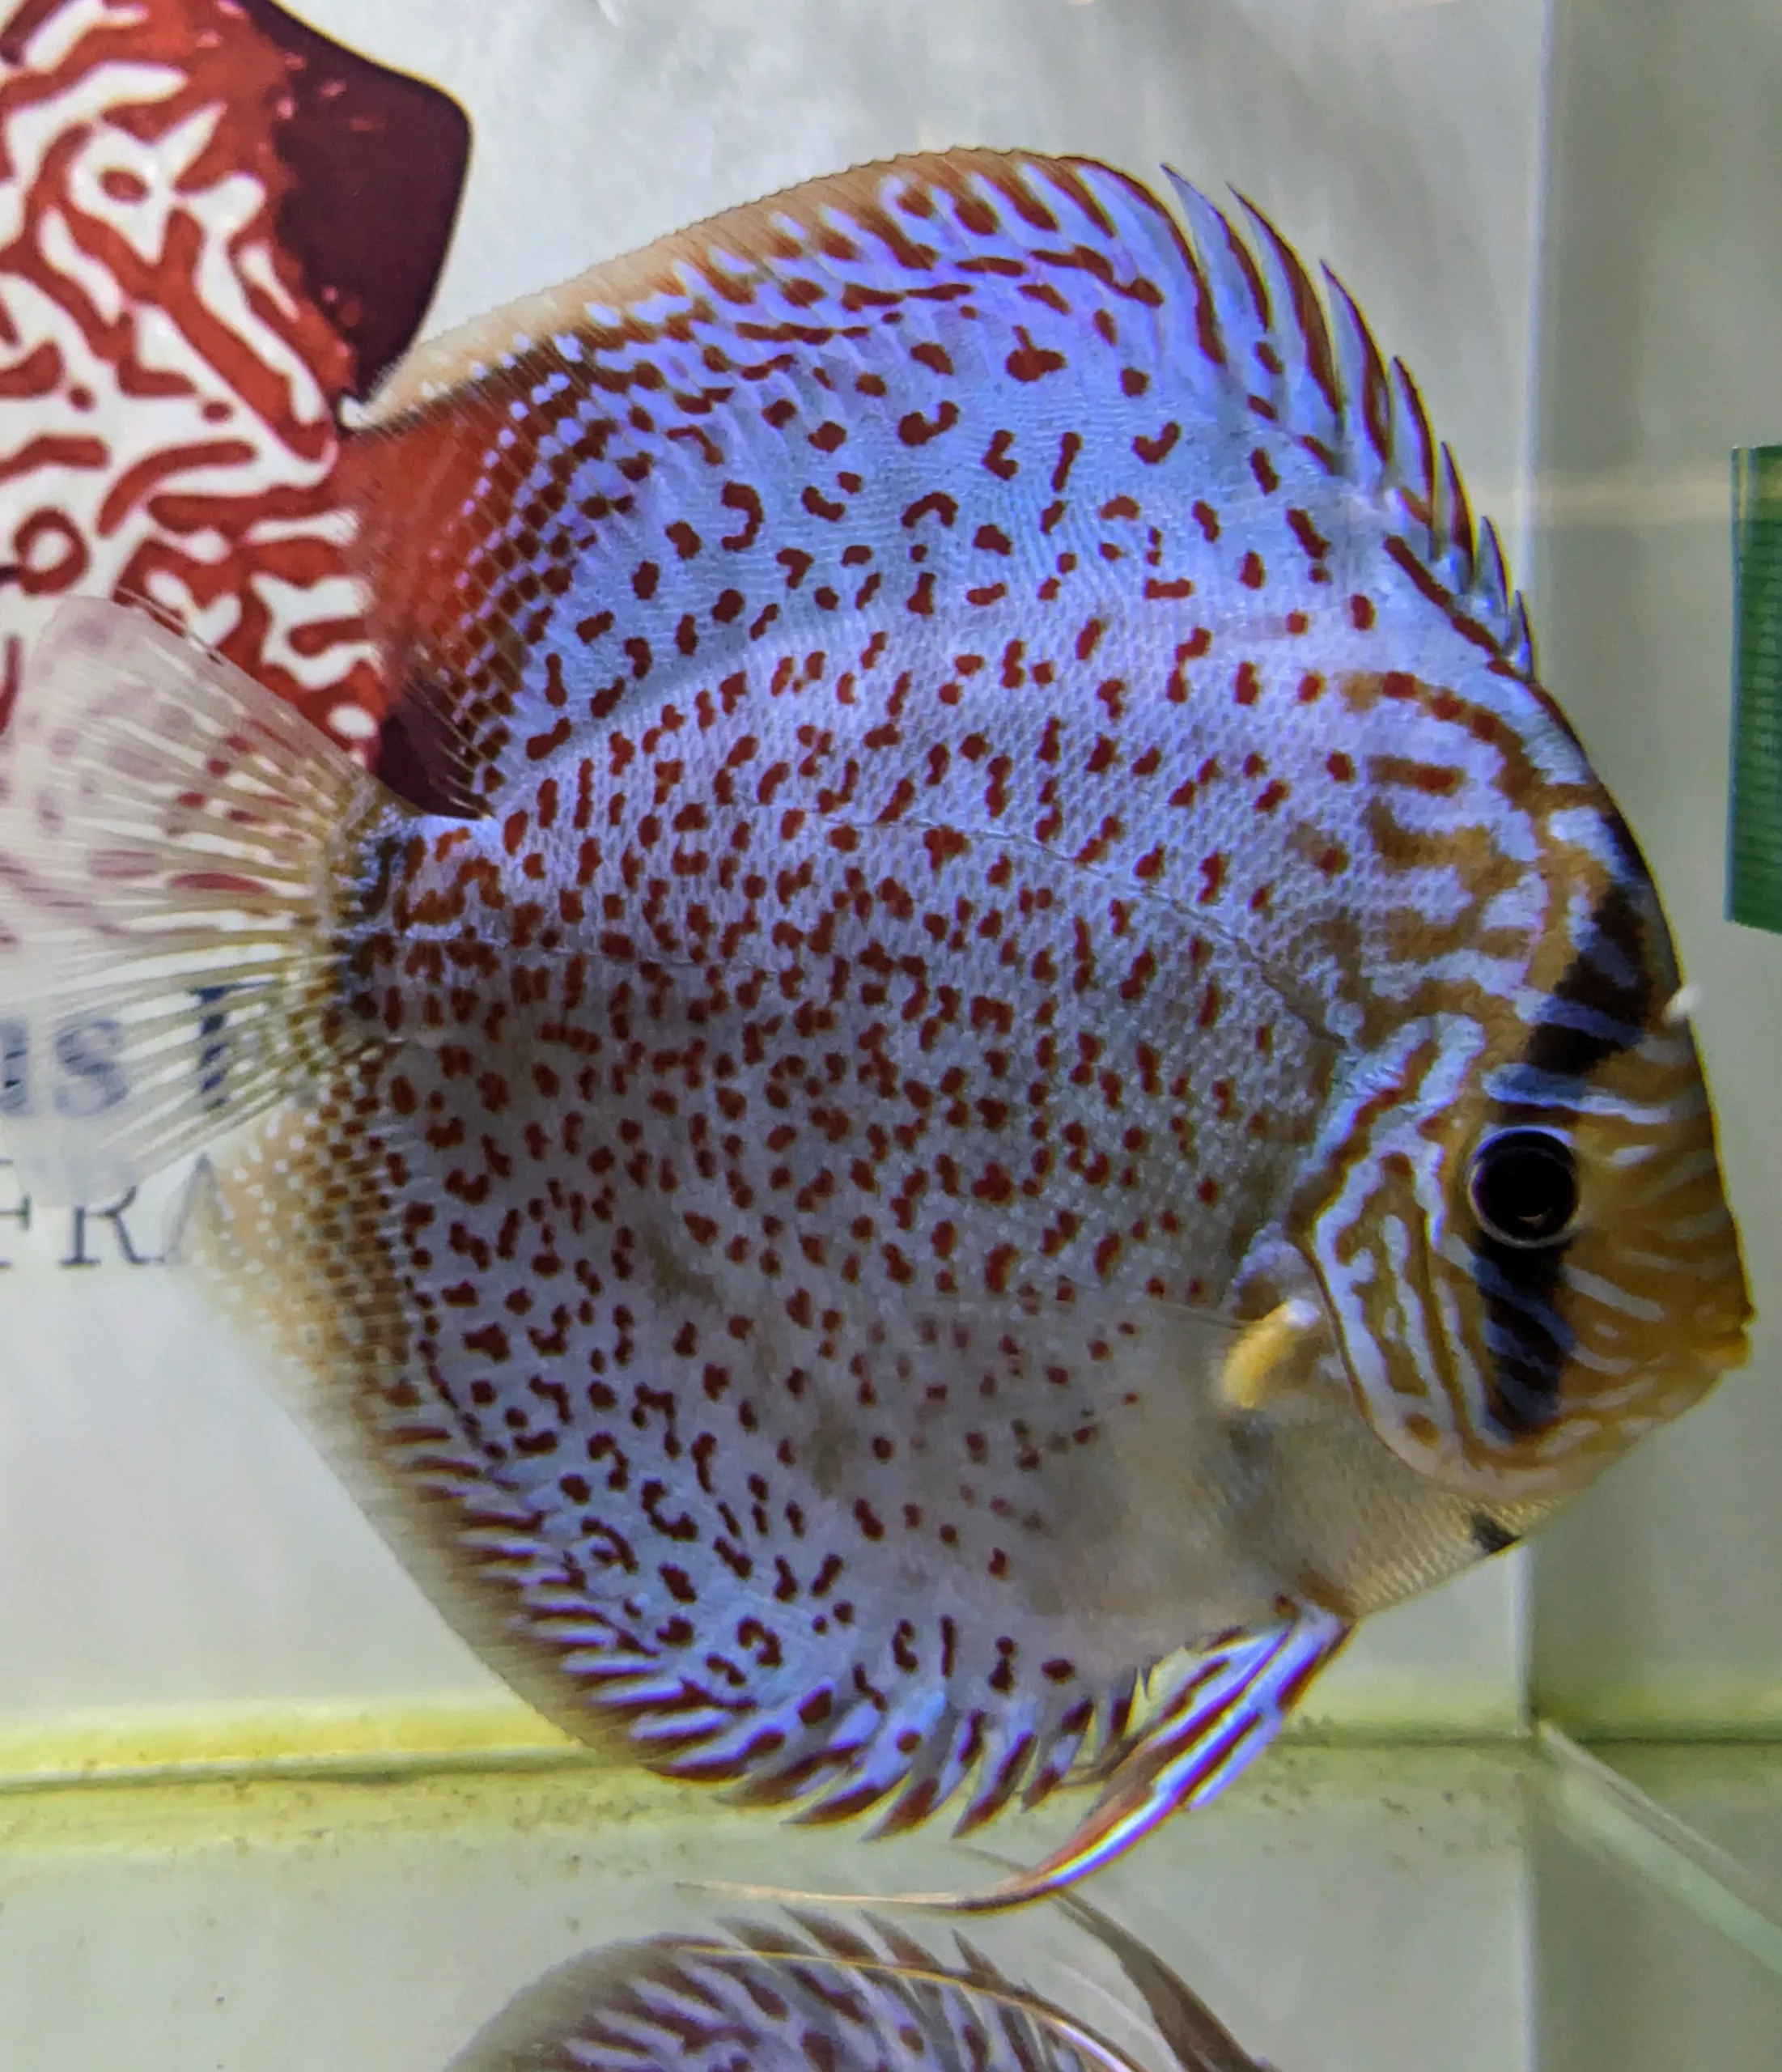 Shop | Chicago Discus | Your discus fish specialty store